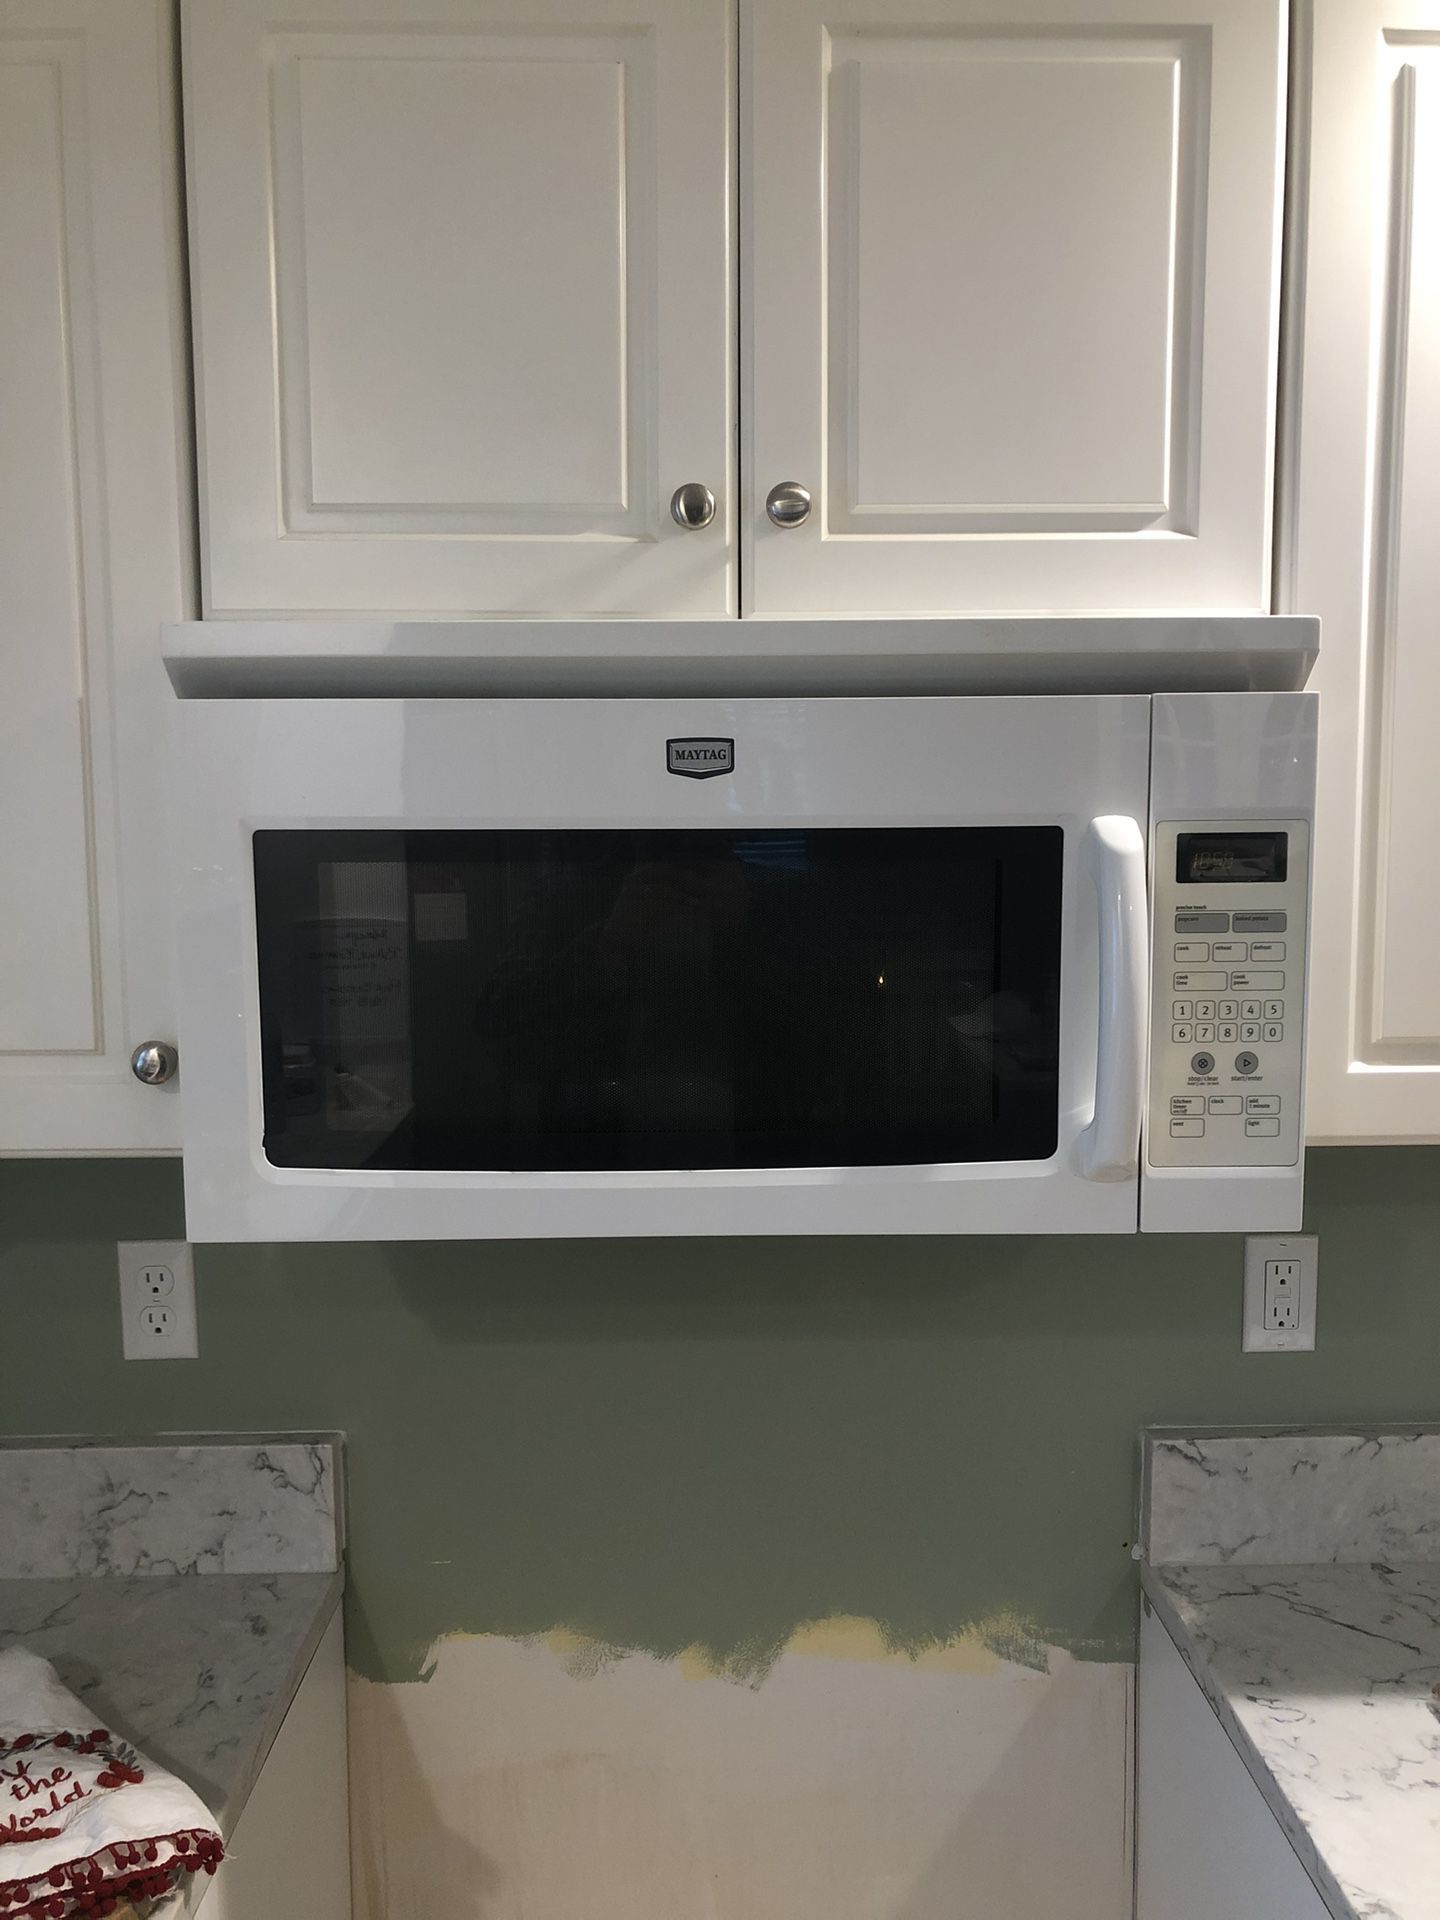 1.Maytag Over  the Range Microwave with Stainless Steel Cavity in White